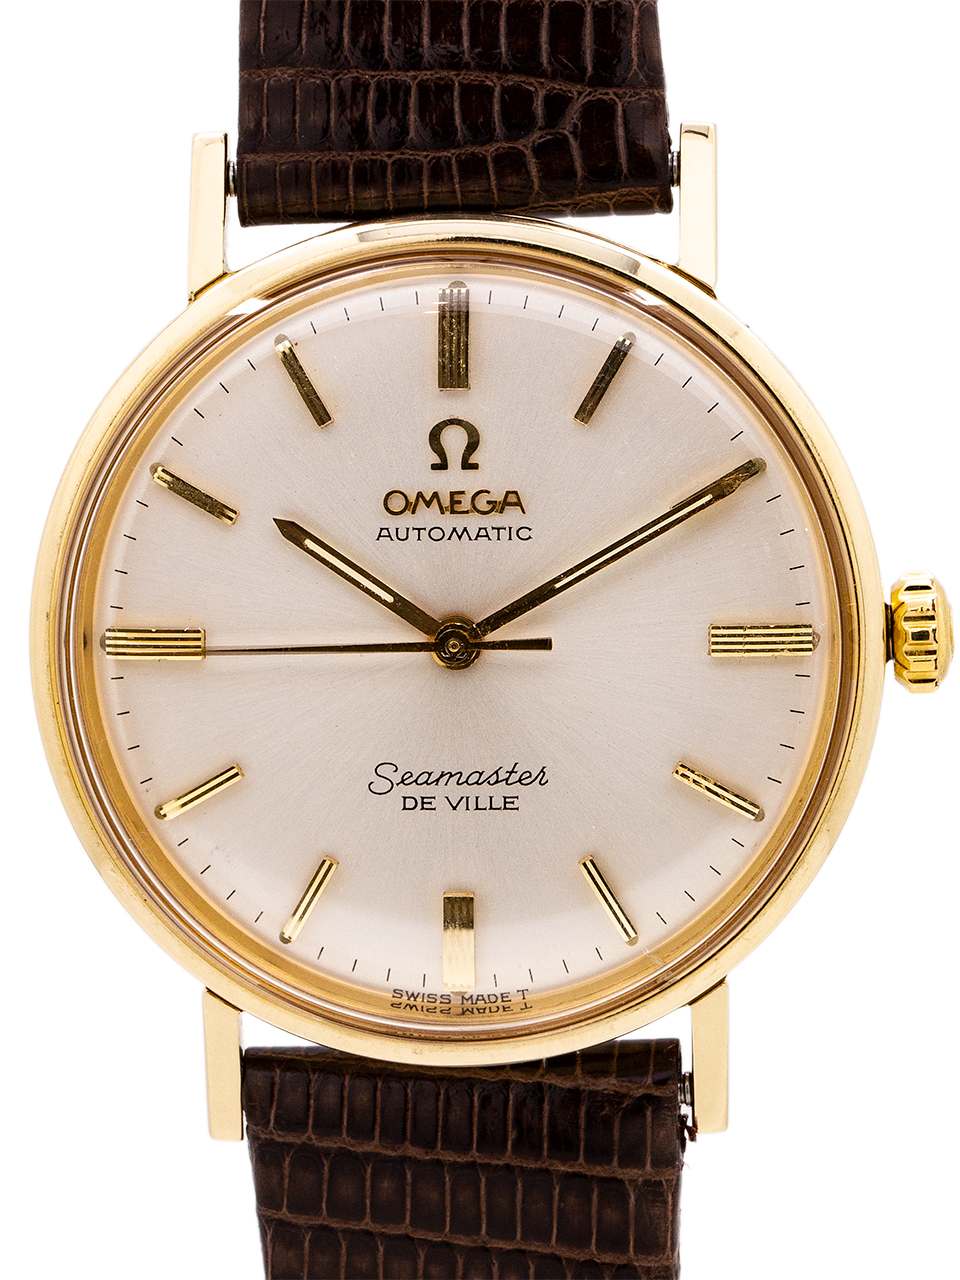 omega automatic deville swiss made